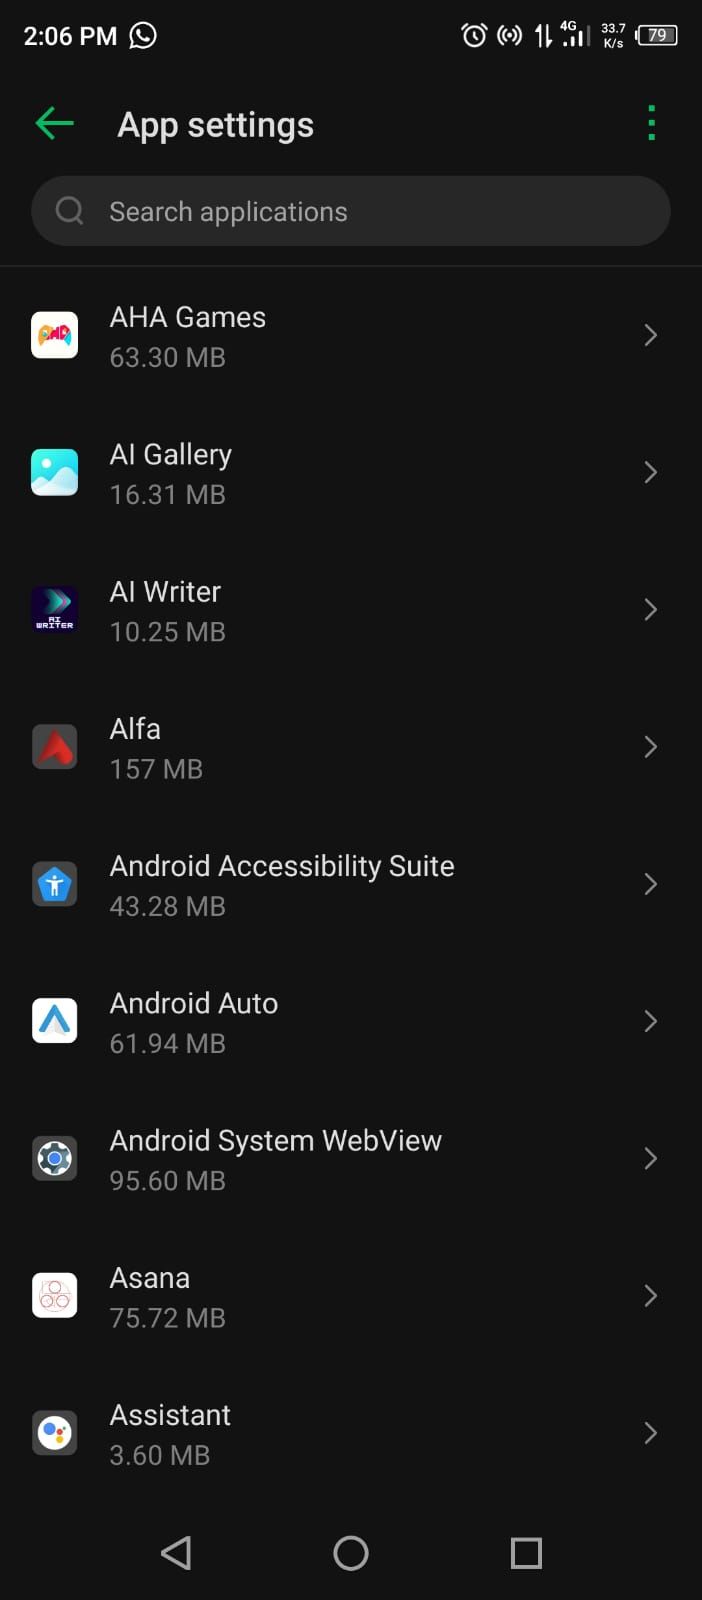 App List in App Management in Android Settings